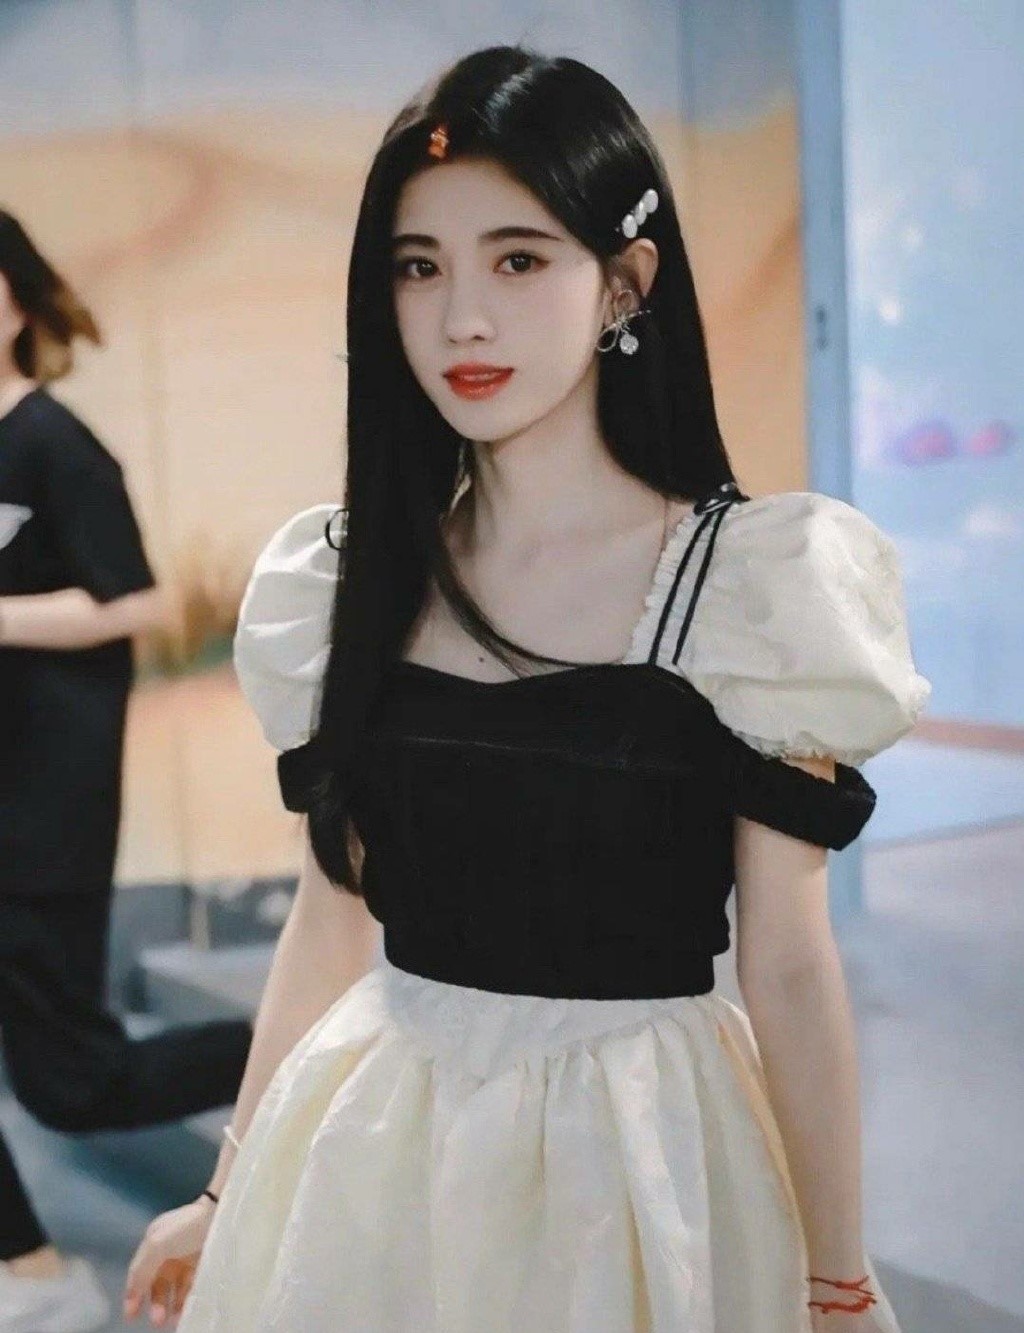 " achieve 4 " the 3rd round of perform in public learns elder sister road to reflect exposure fully, ju Jing  Dai  is too bright eye, ground connection enrages Meng Meiqi